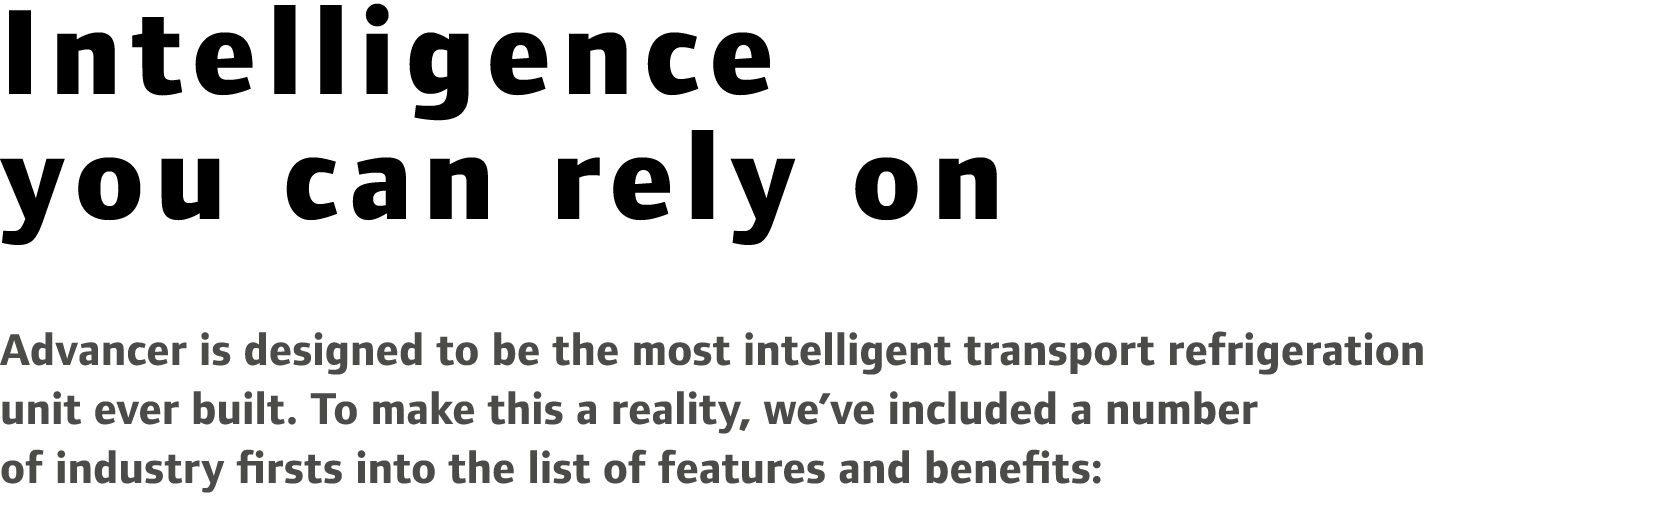 Intelligence you can rely on Advancer is designed to be the most intelligent transport refrigeration unit ever built....